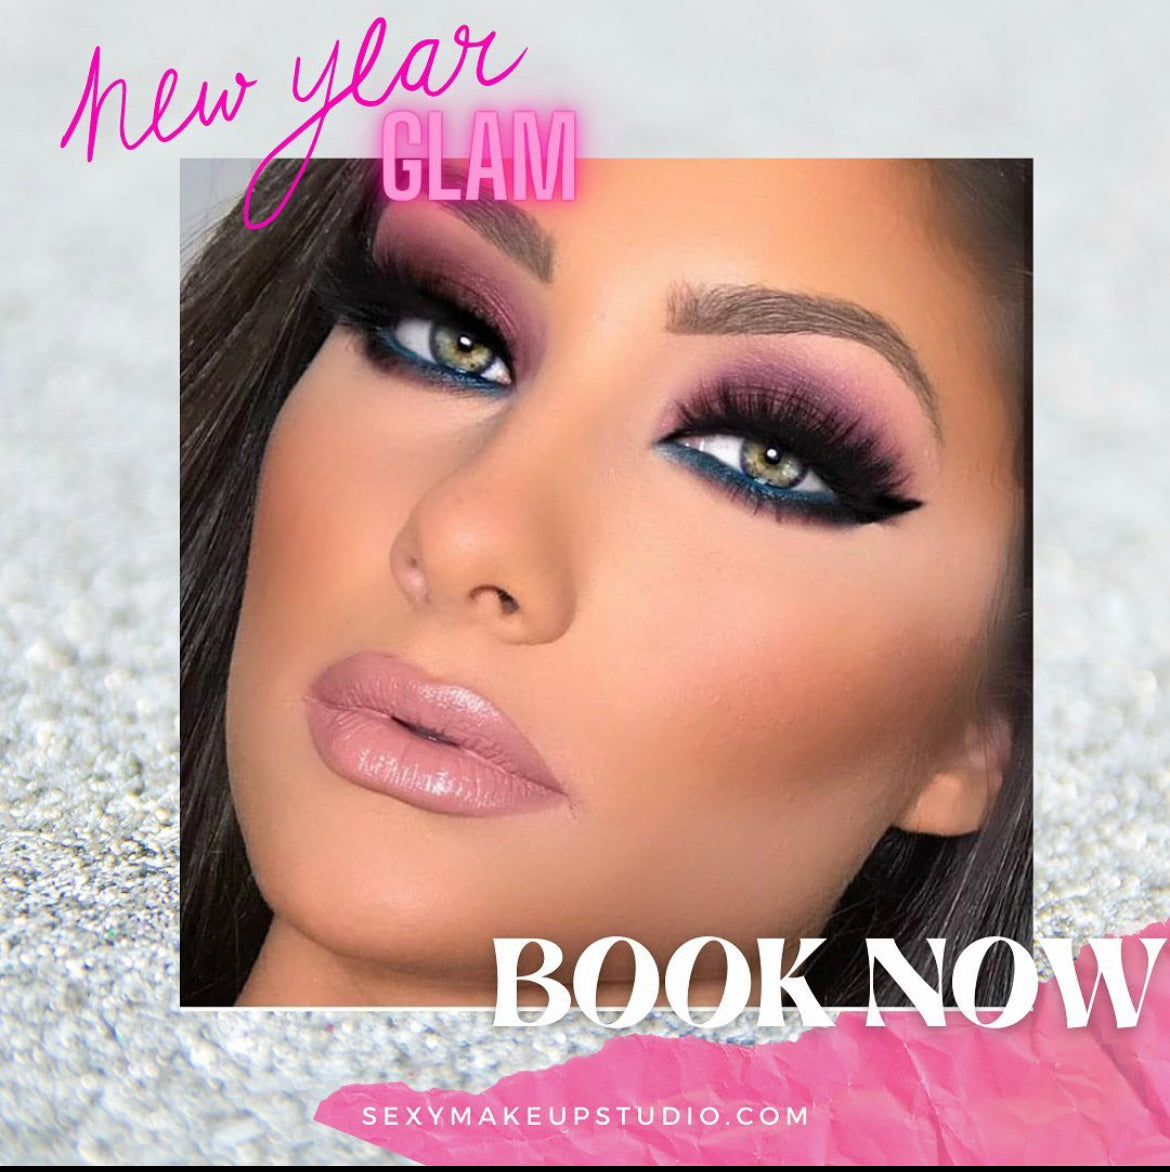 New Year Glam Specials